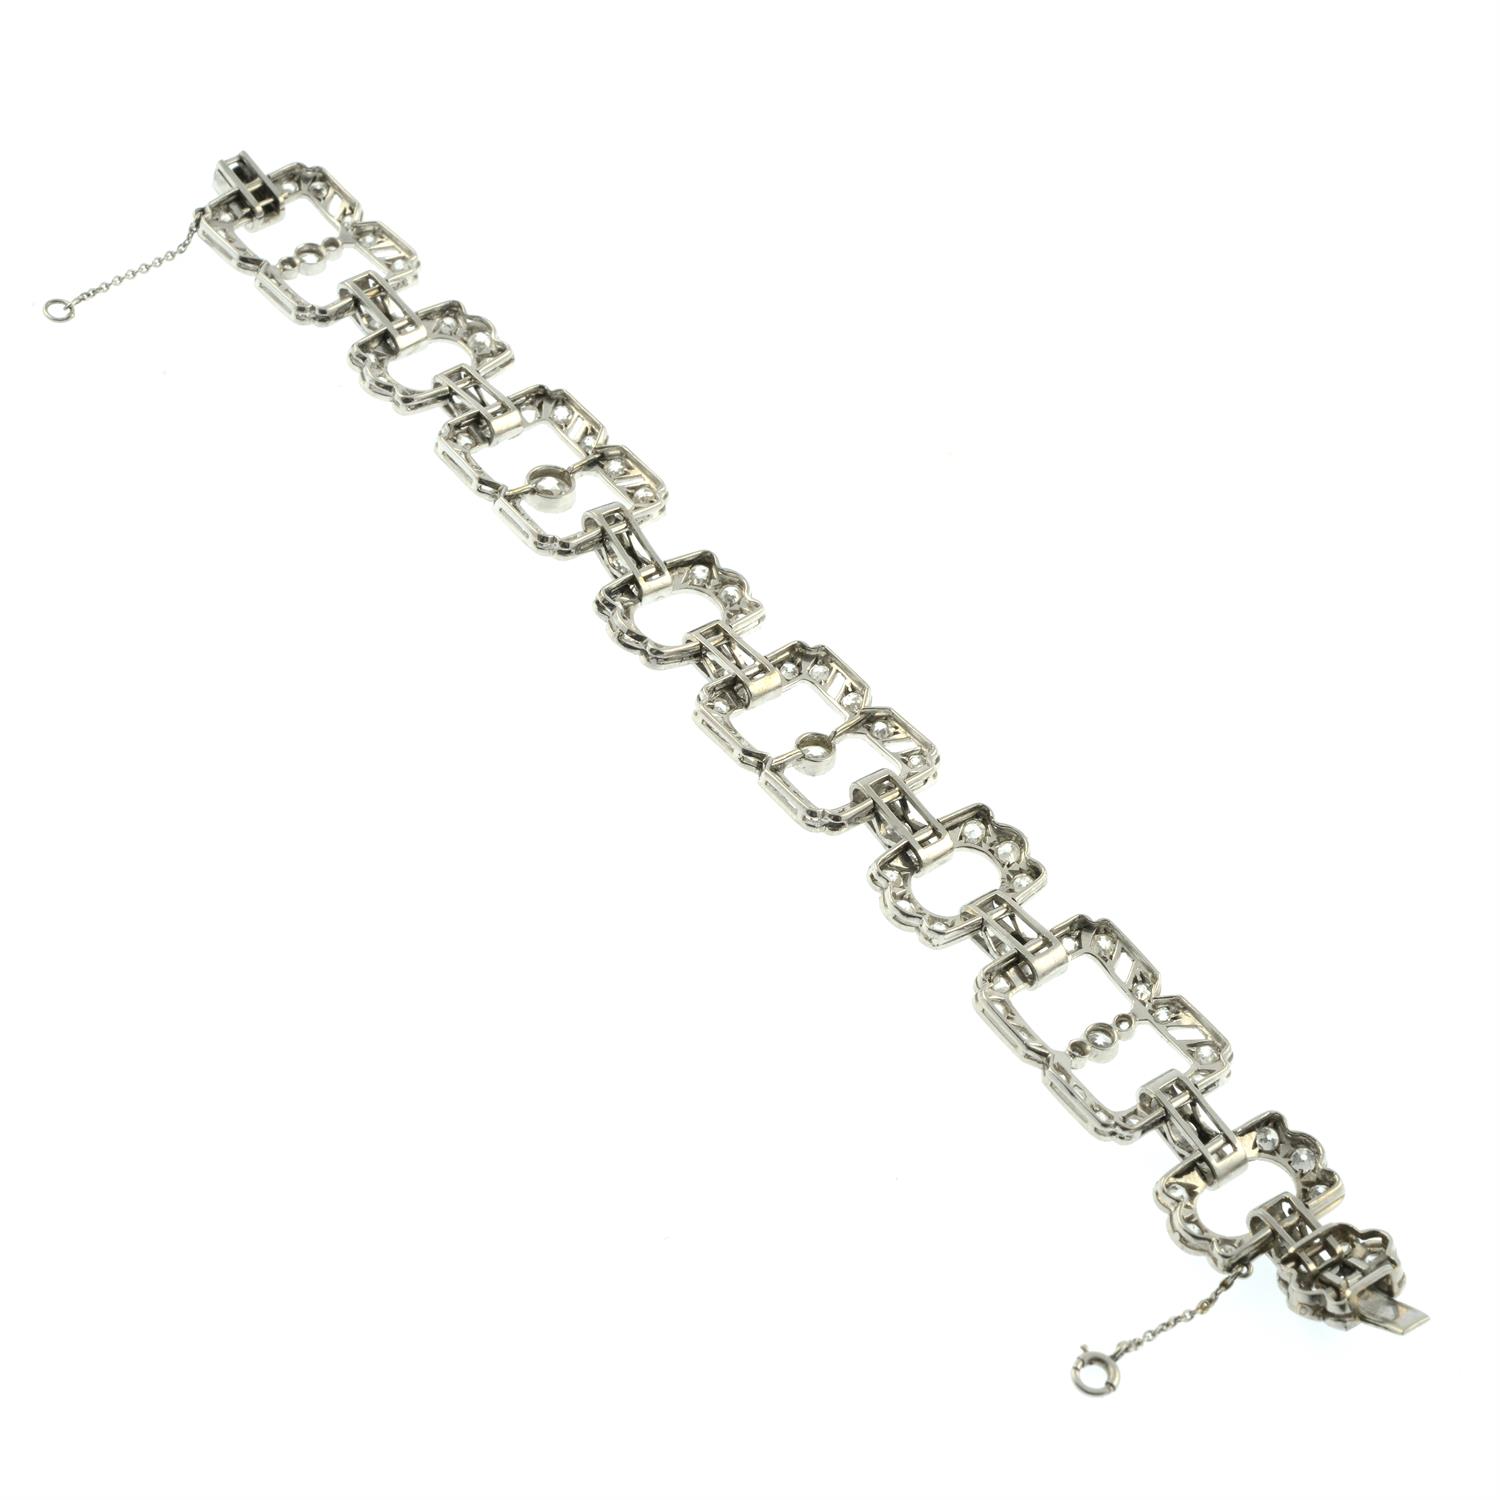 An Art Deco old and rose-cut diamond bracelet. - Image 4 of 4